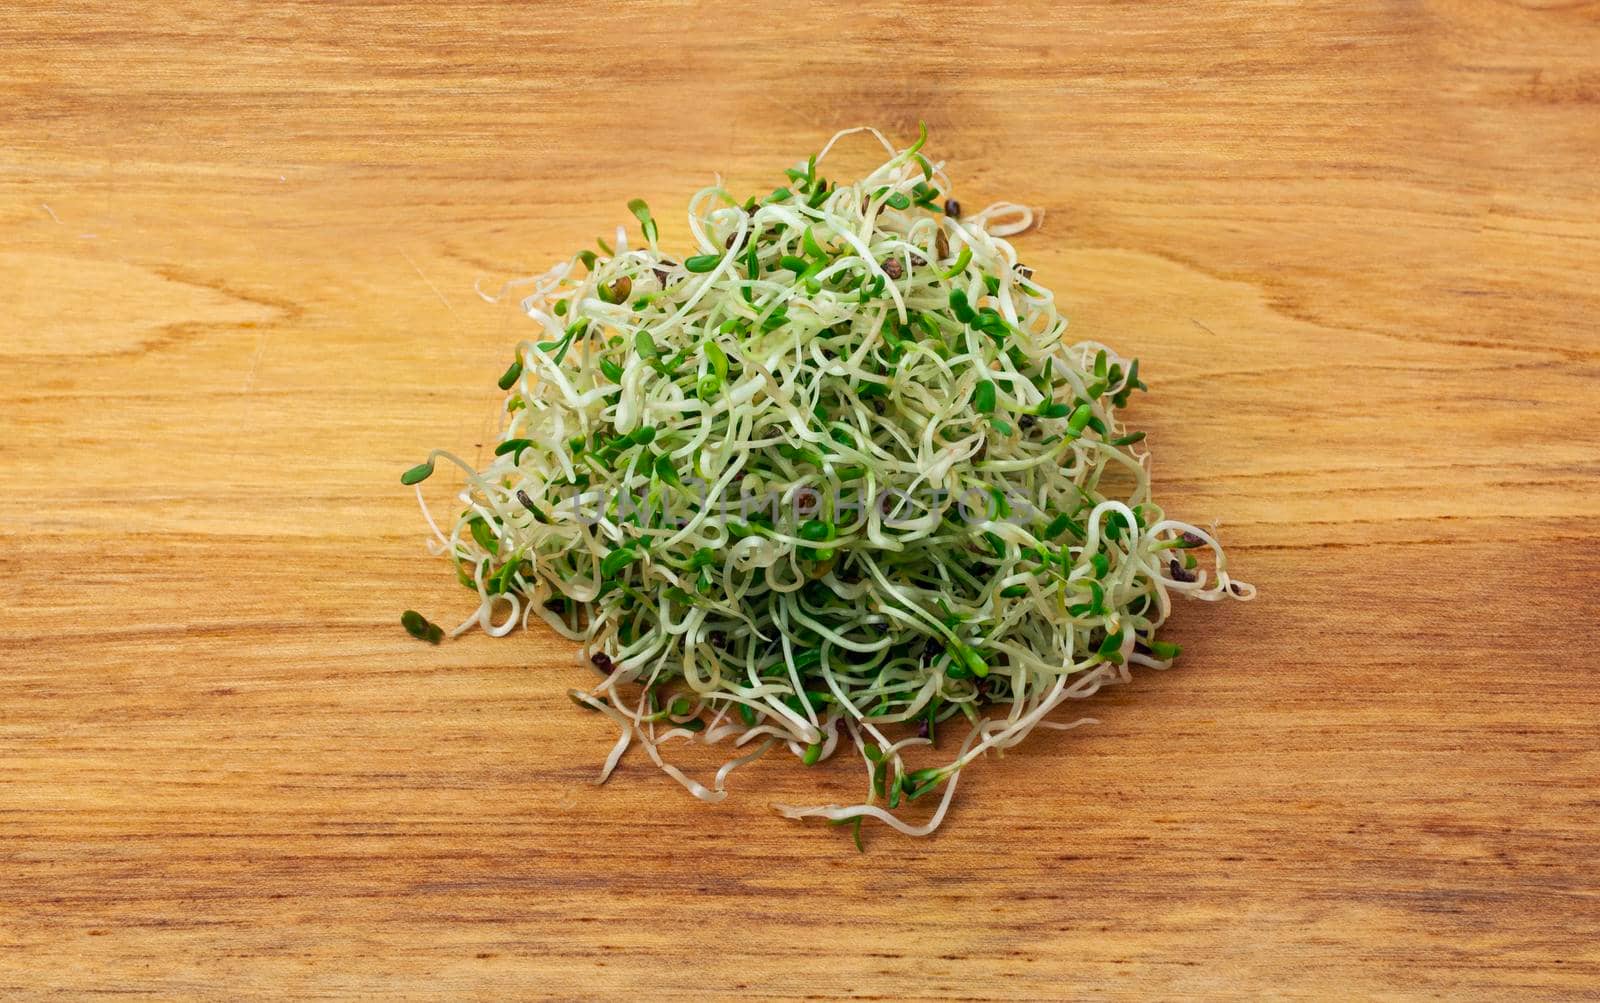 Organic young alfalfa sprouts on a wooden table background close up